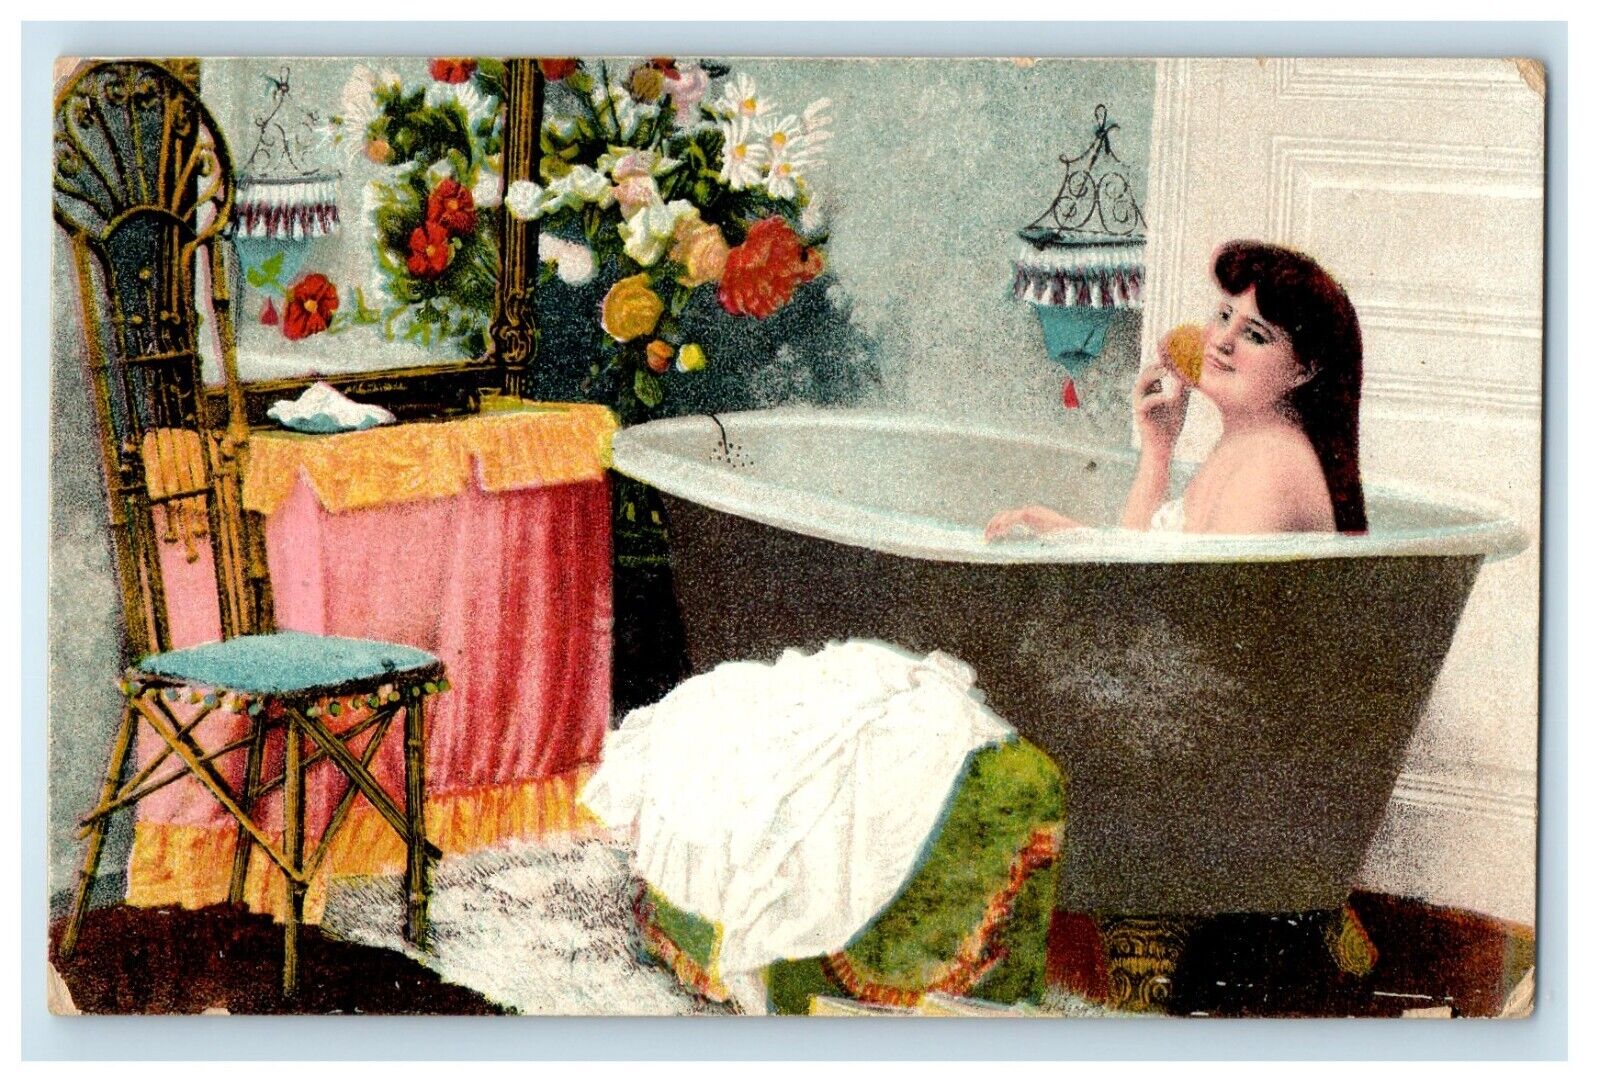 Girl In Bath Comfort Room Interior Chair And Flowers Unposted Postcard